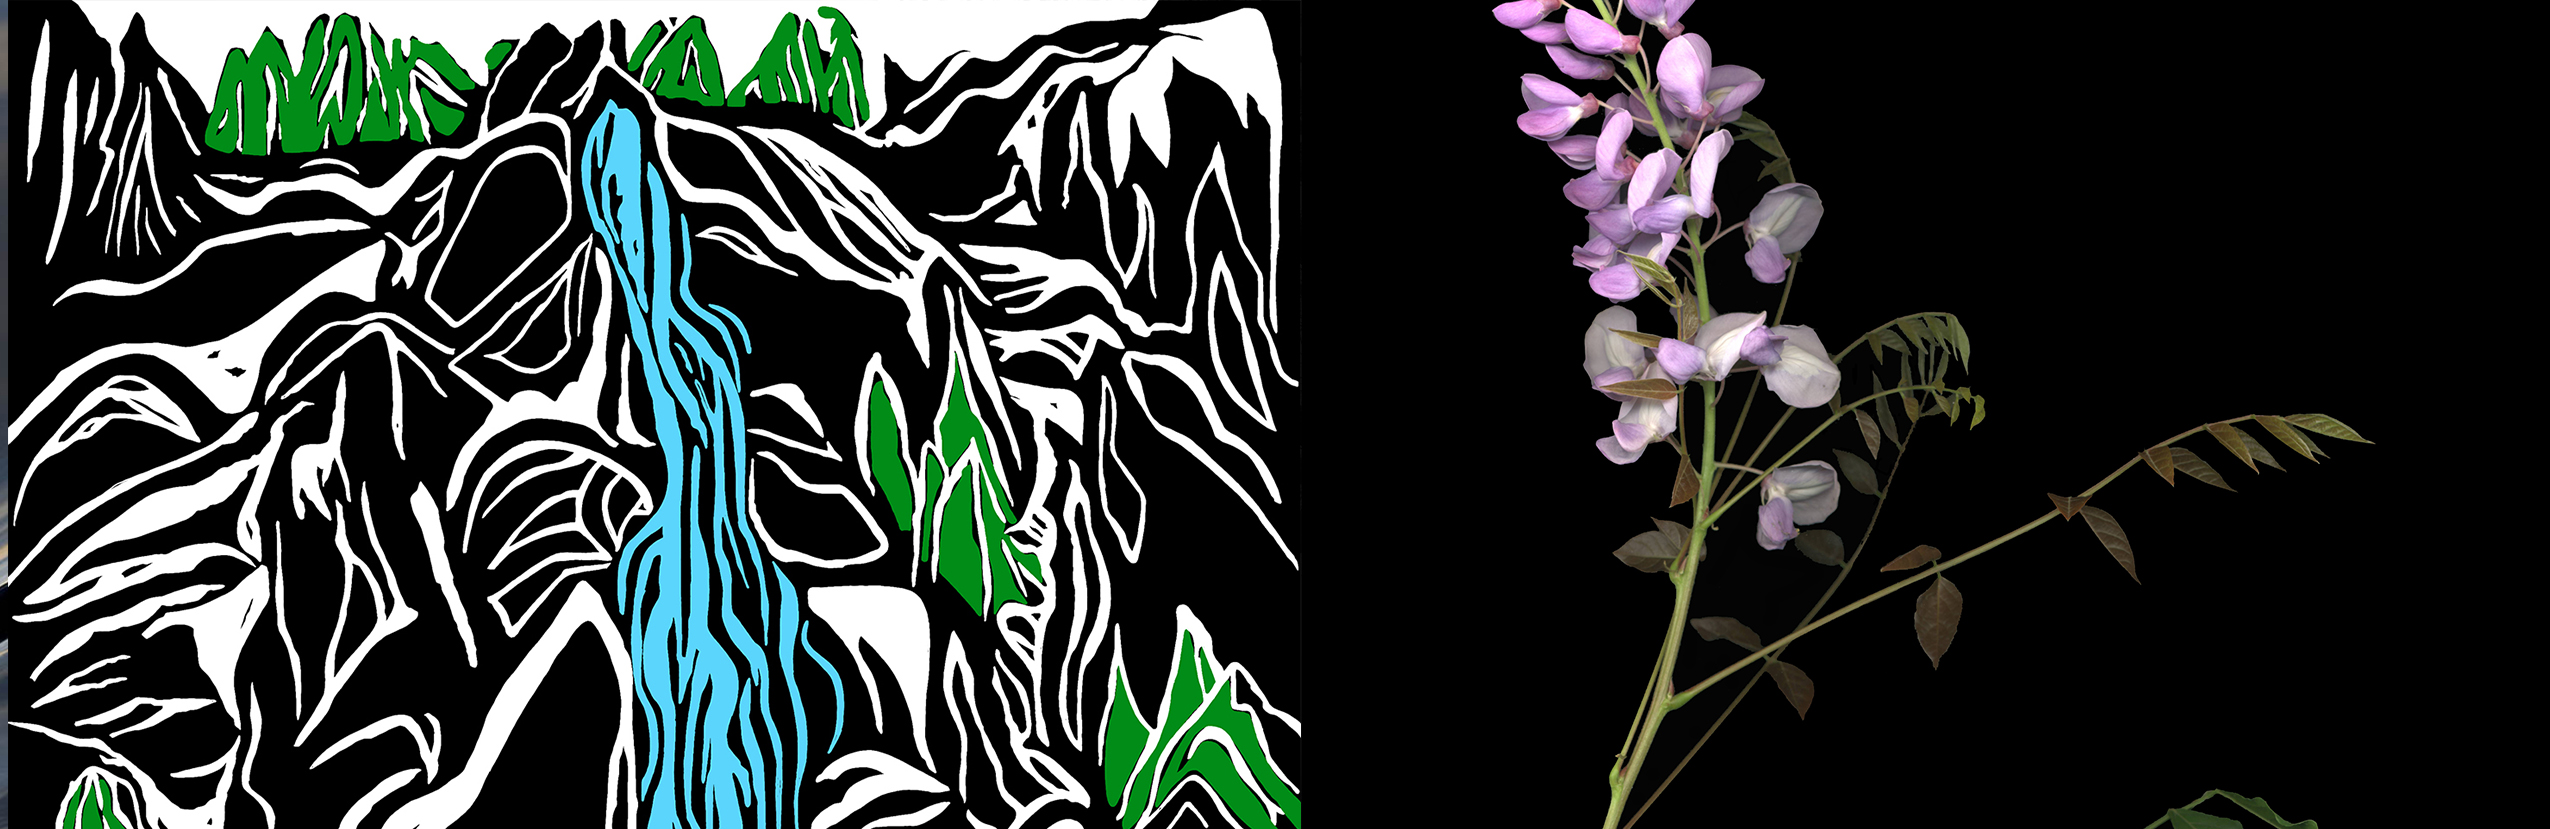 Do What You Like: Explorations in Digital Painting and Herbarium